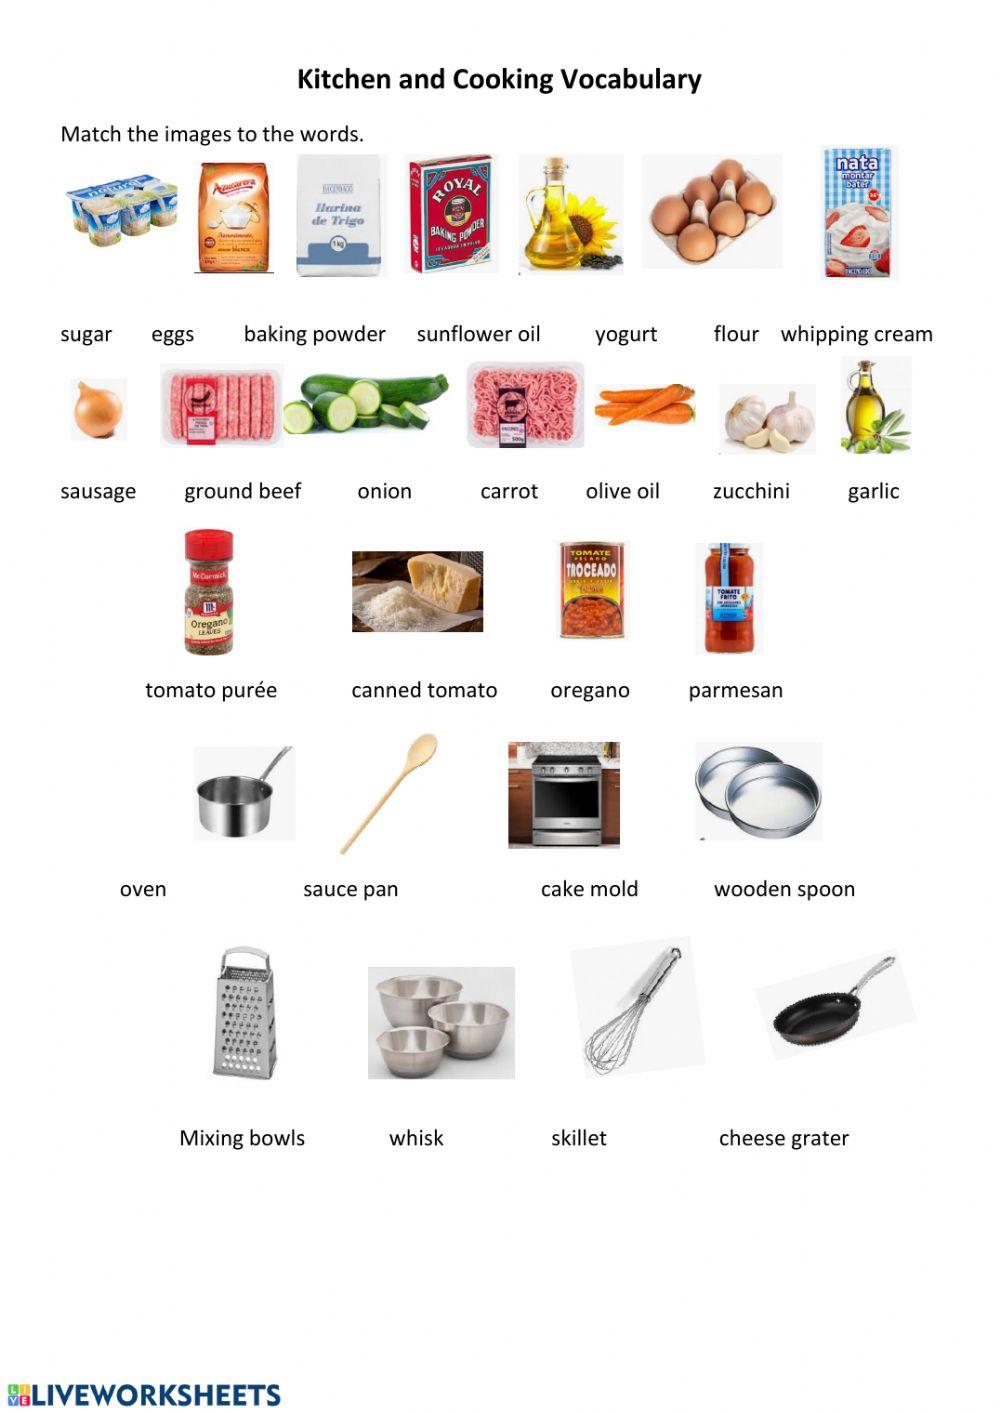 Kitchen and Cooking Vocabulary